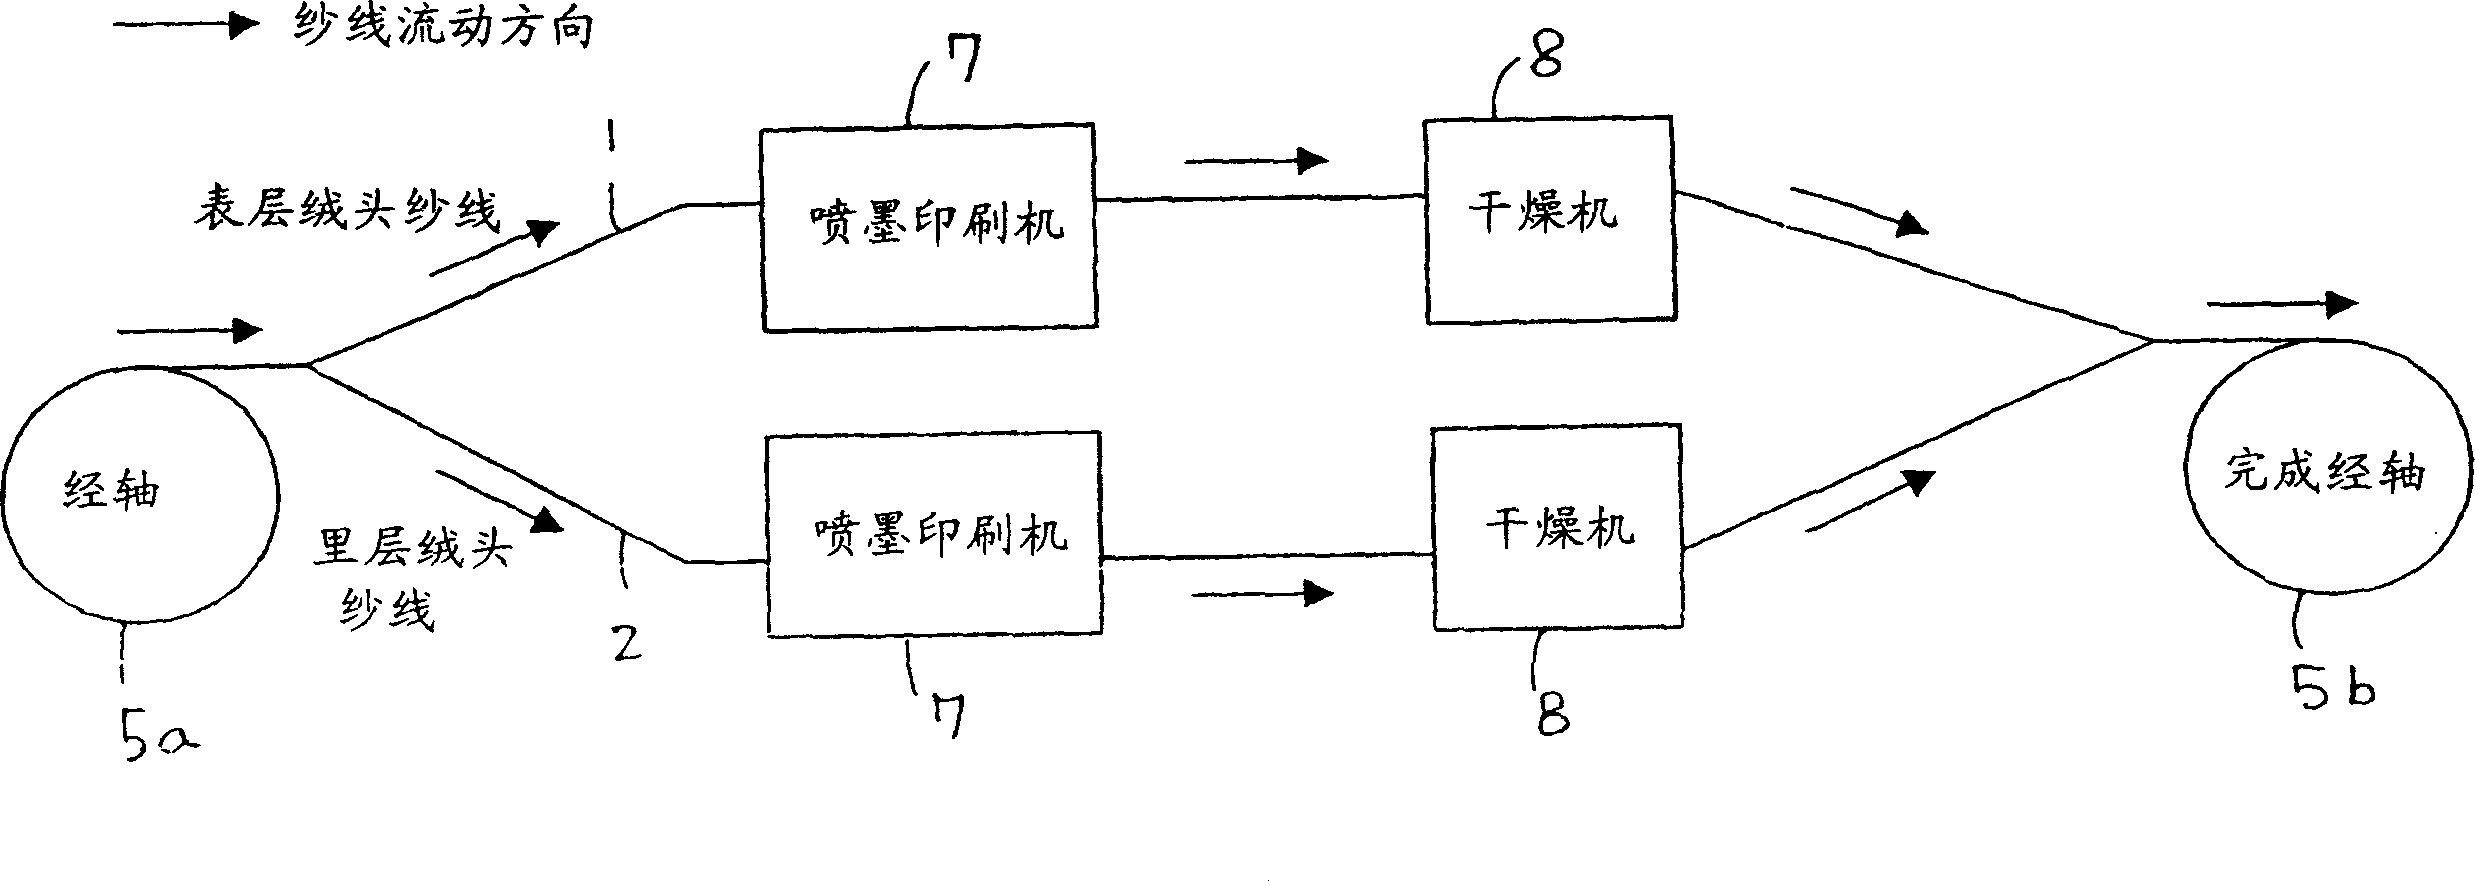 Dyeing processing method for textile